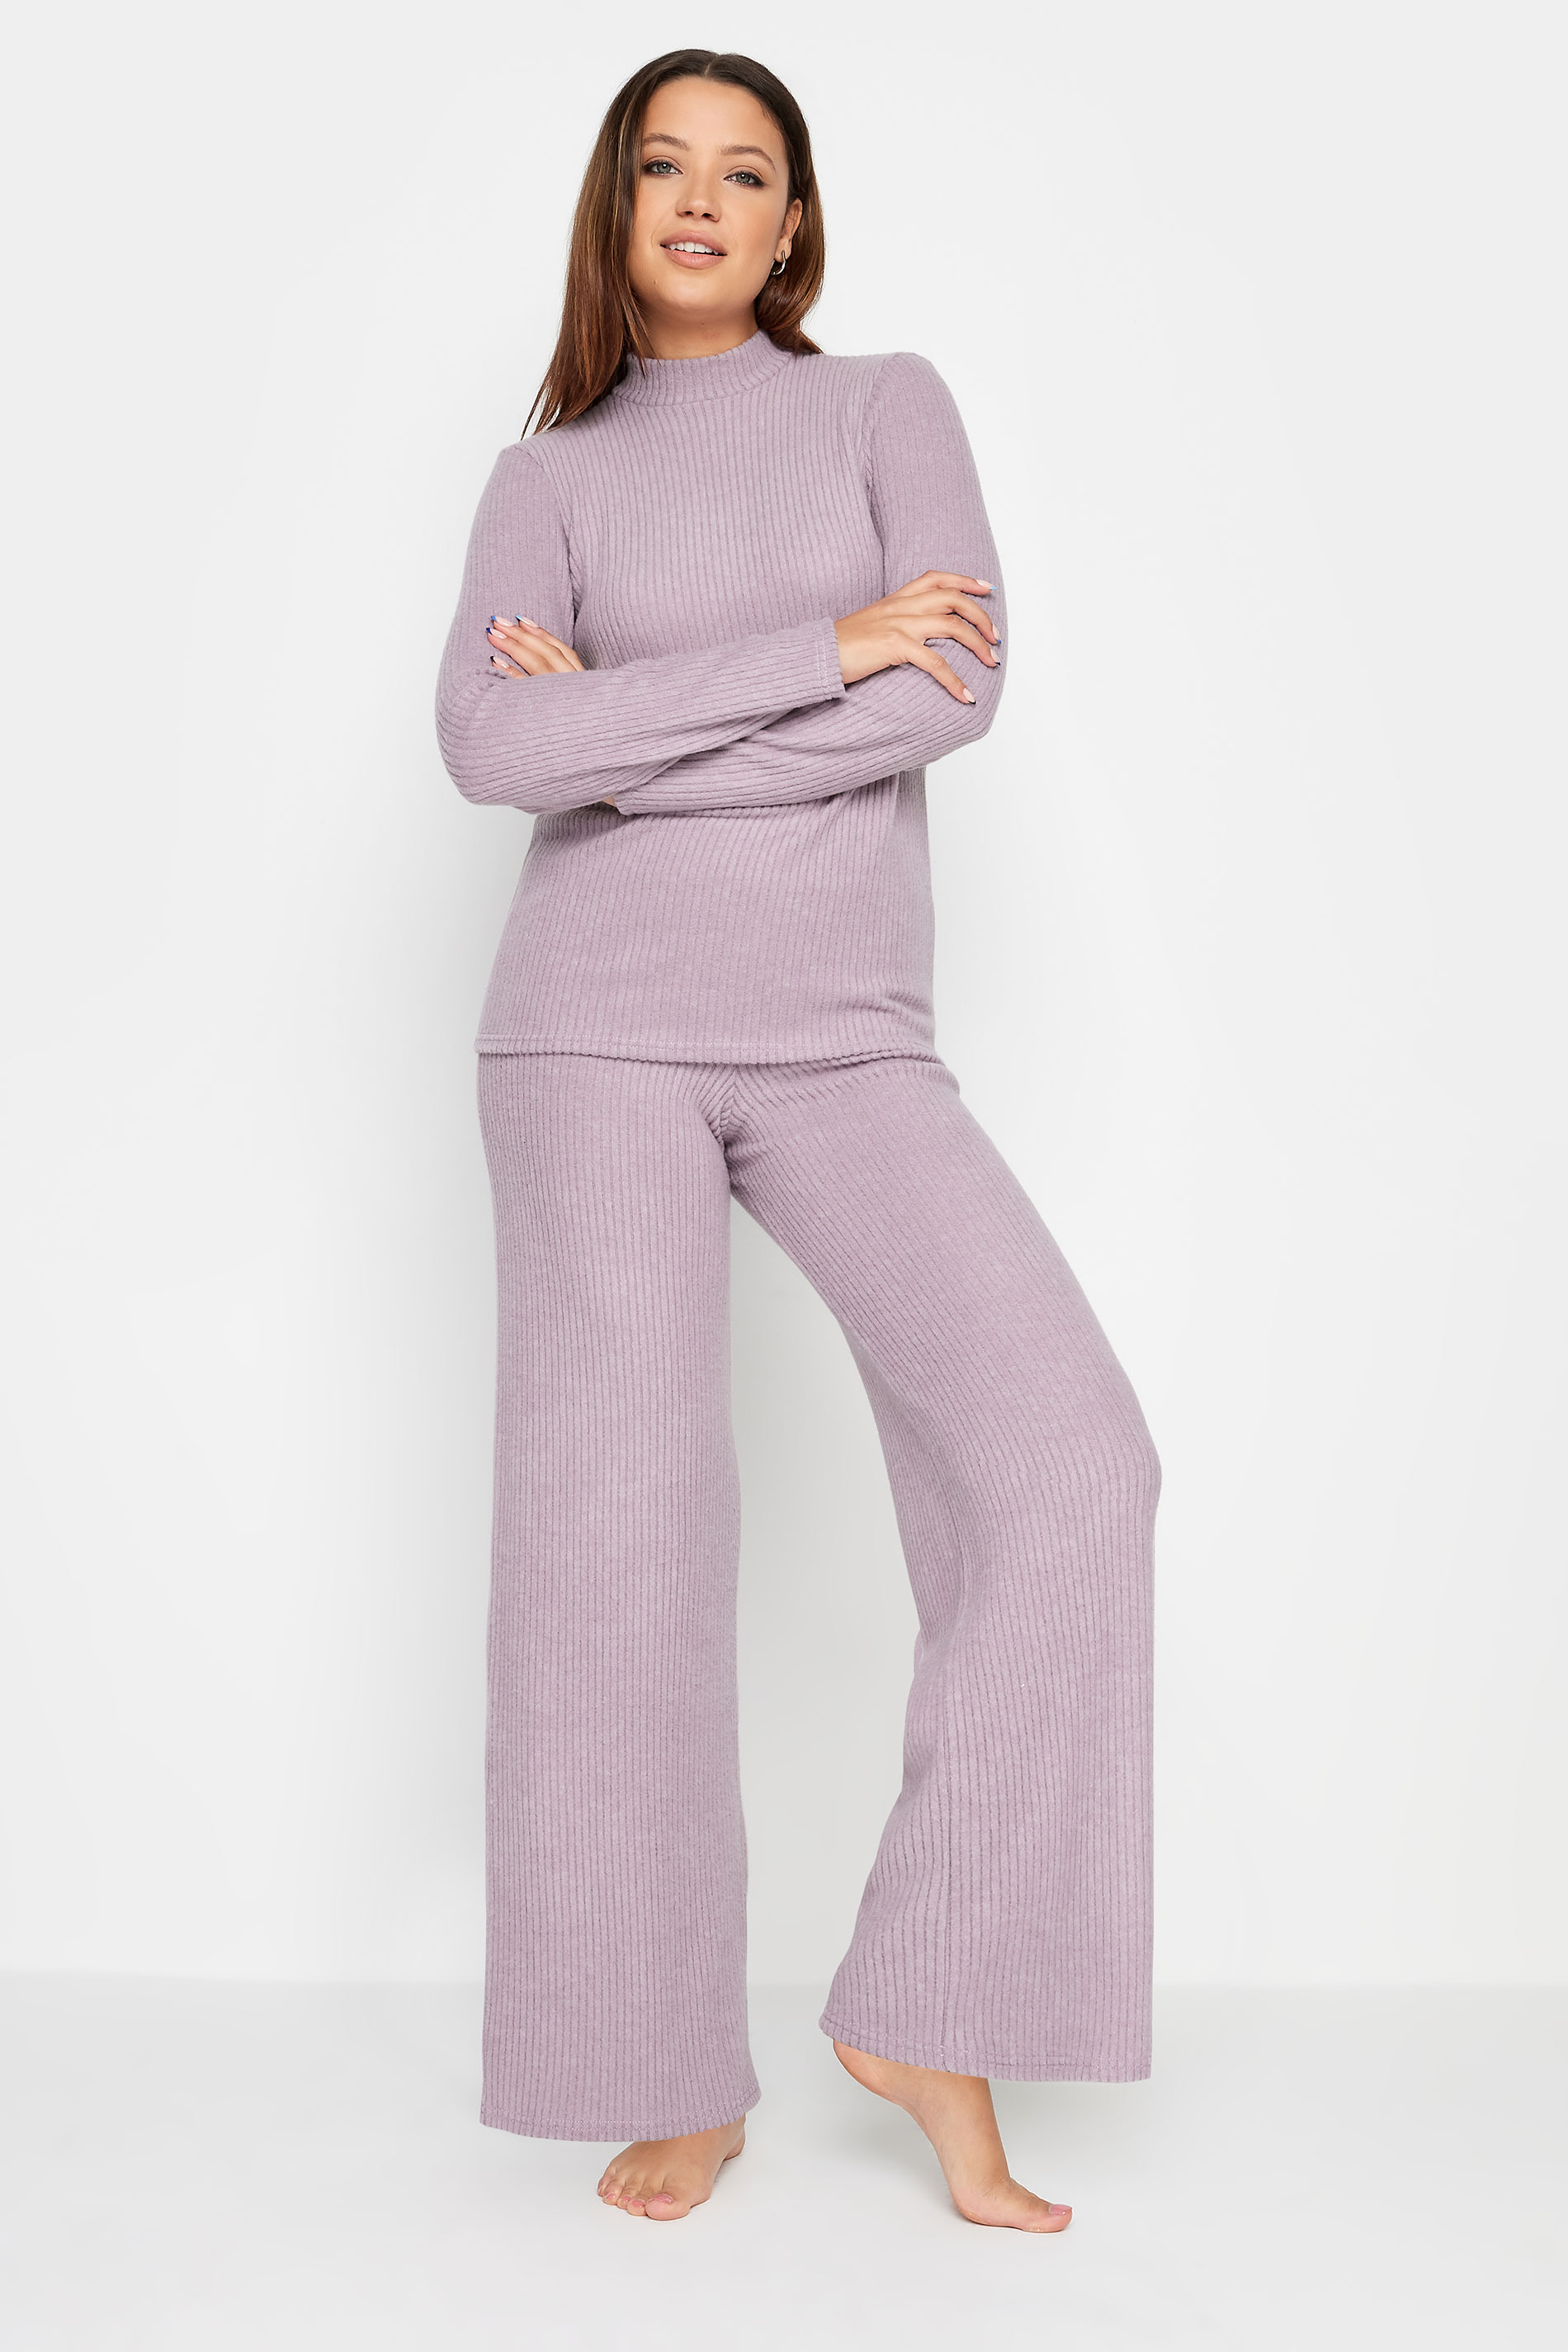 LTS Tall Pink High Neck Knitted Top | Long Tall Sally  2